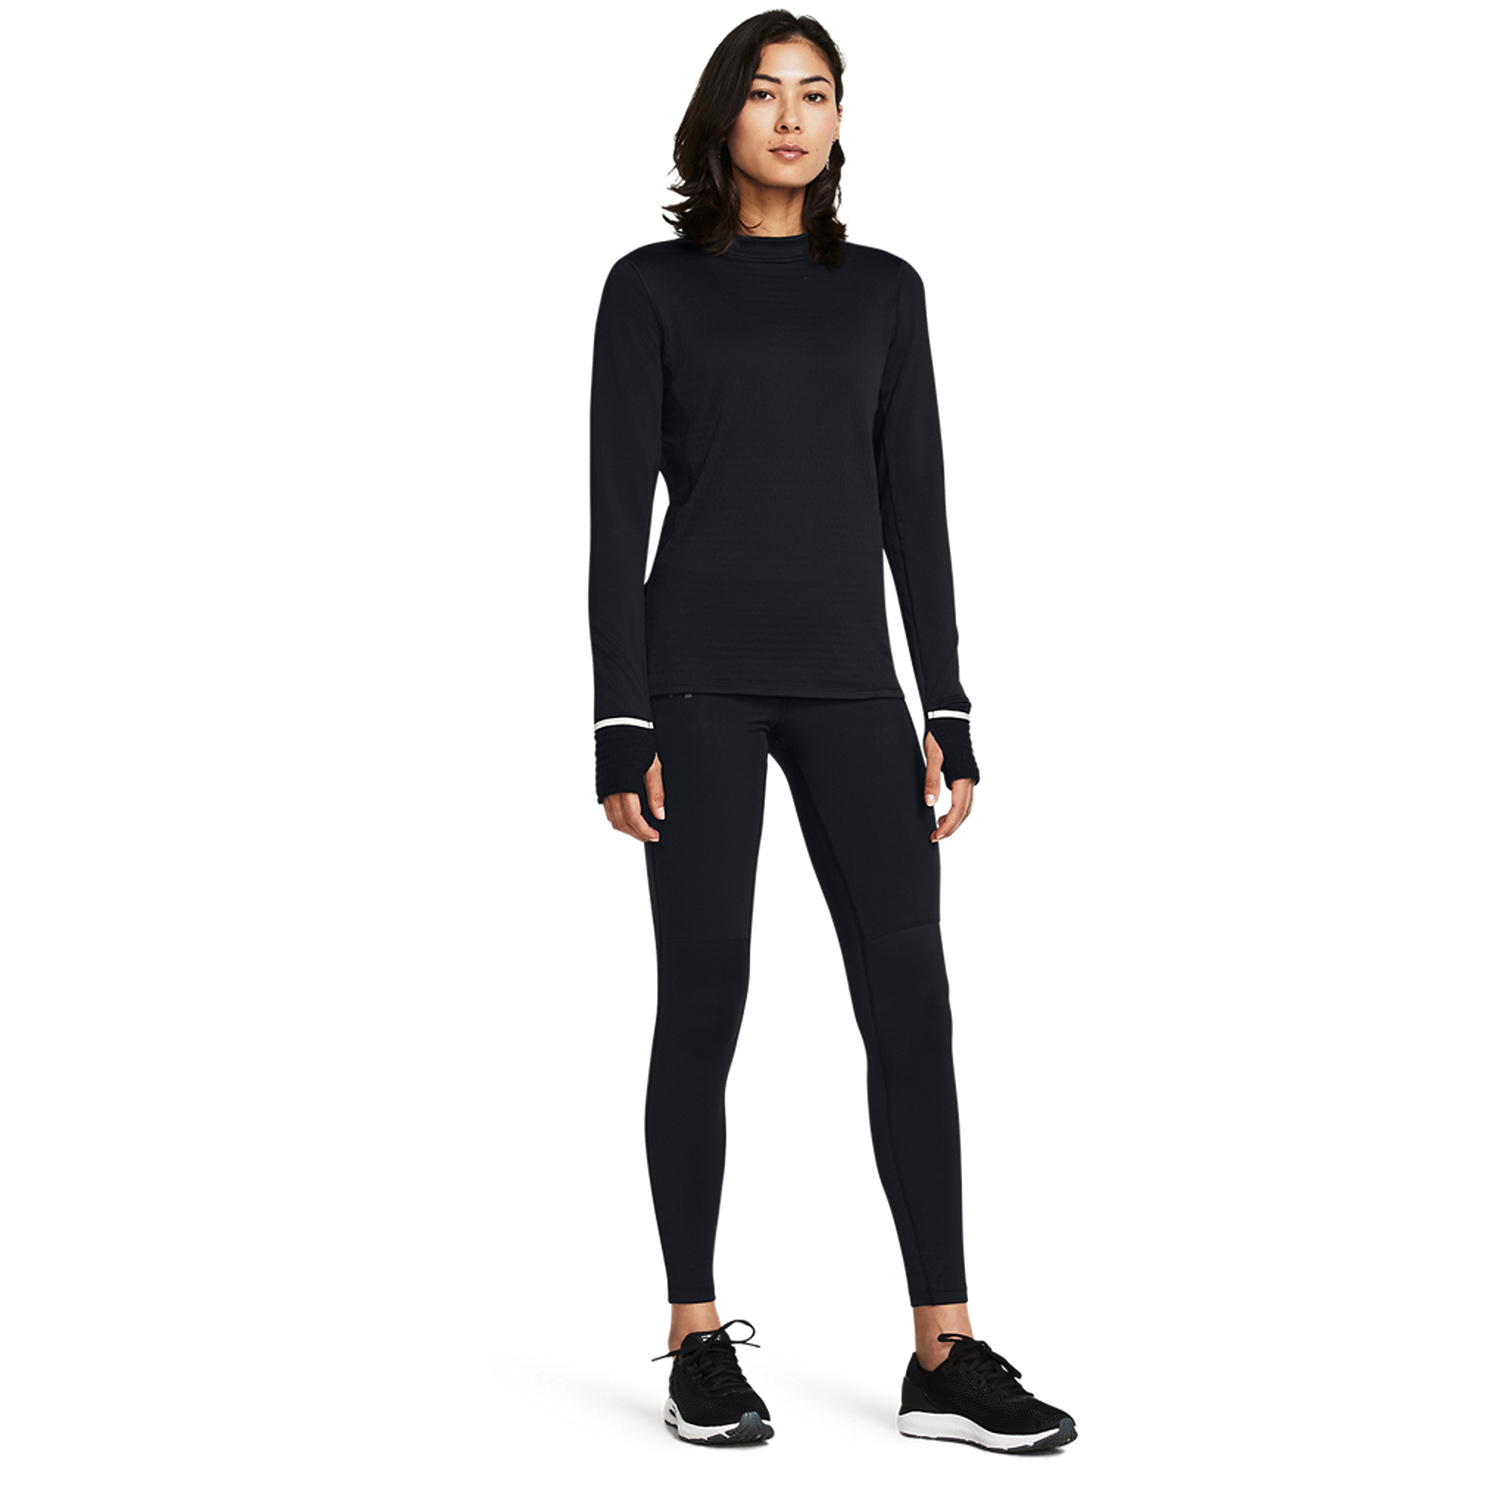 Under Armour Qualifier Cold Tights - Black